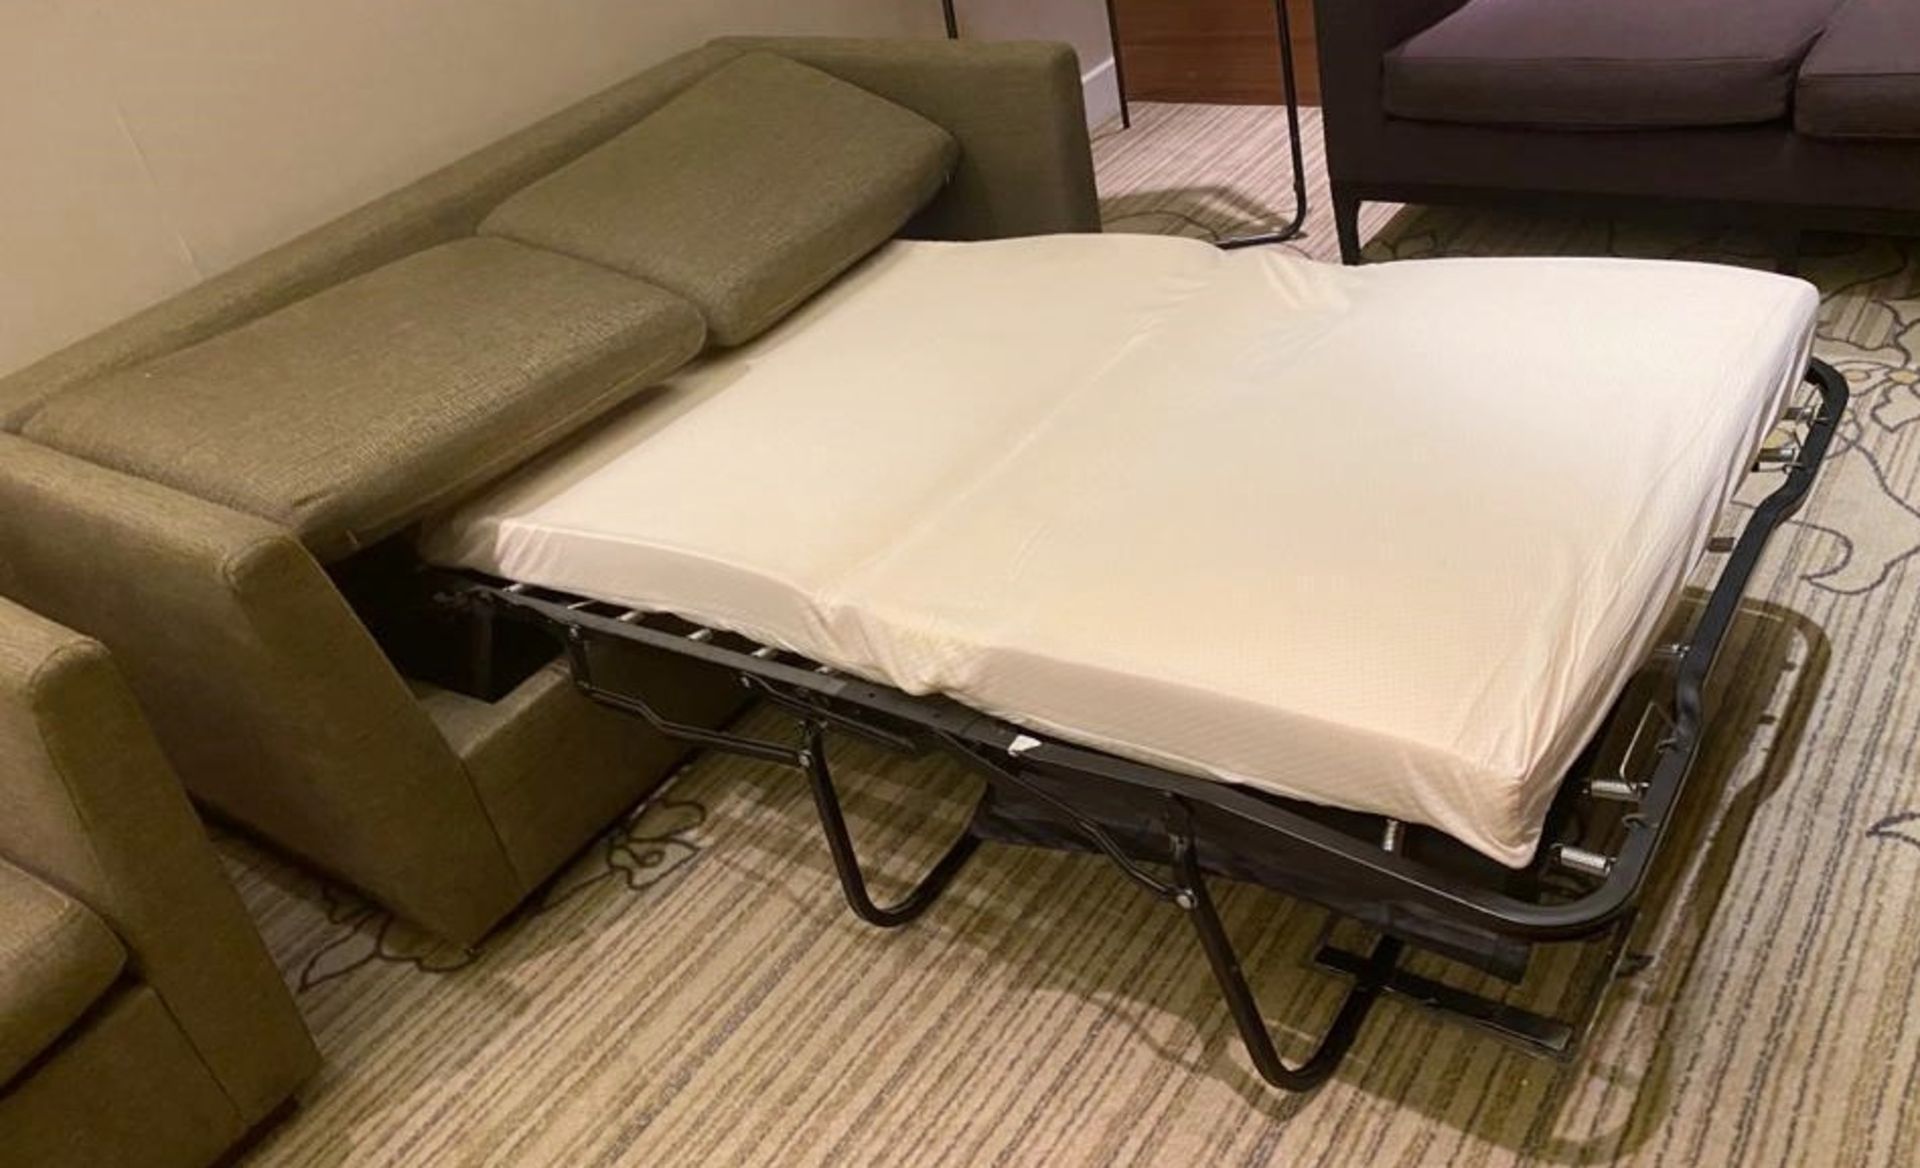 1 x 2-Seater Fold-out Sofa Bed Futon, Upholstered in a Premium Woven Fabric - Recently Procured From - Image 3 of 4